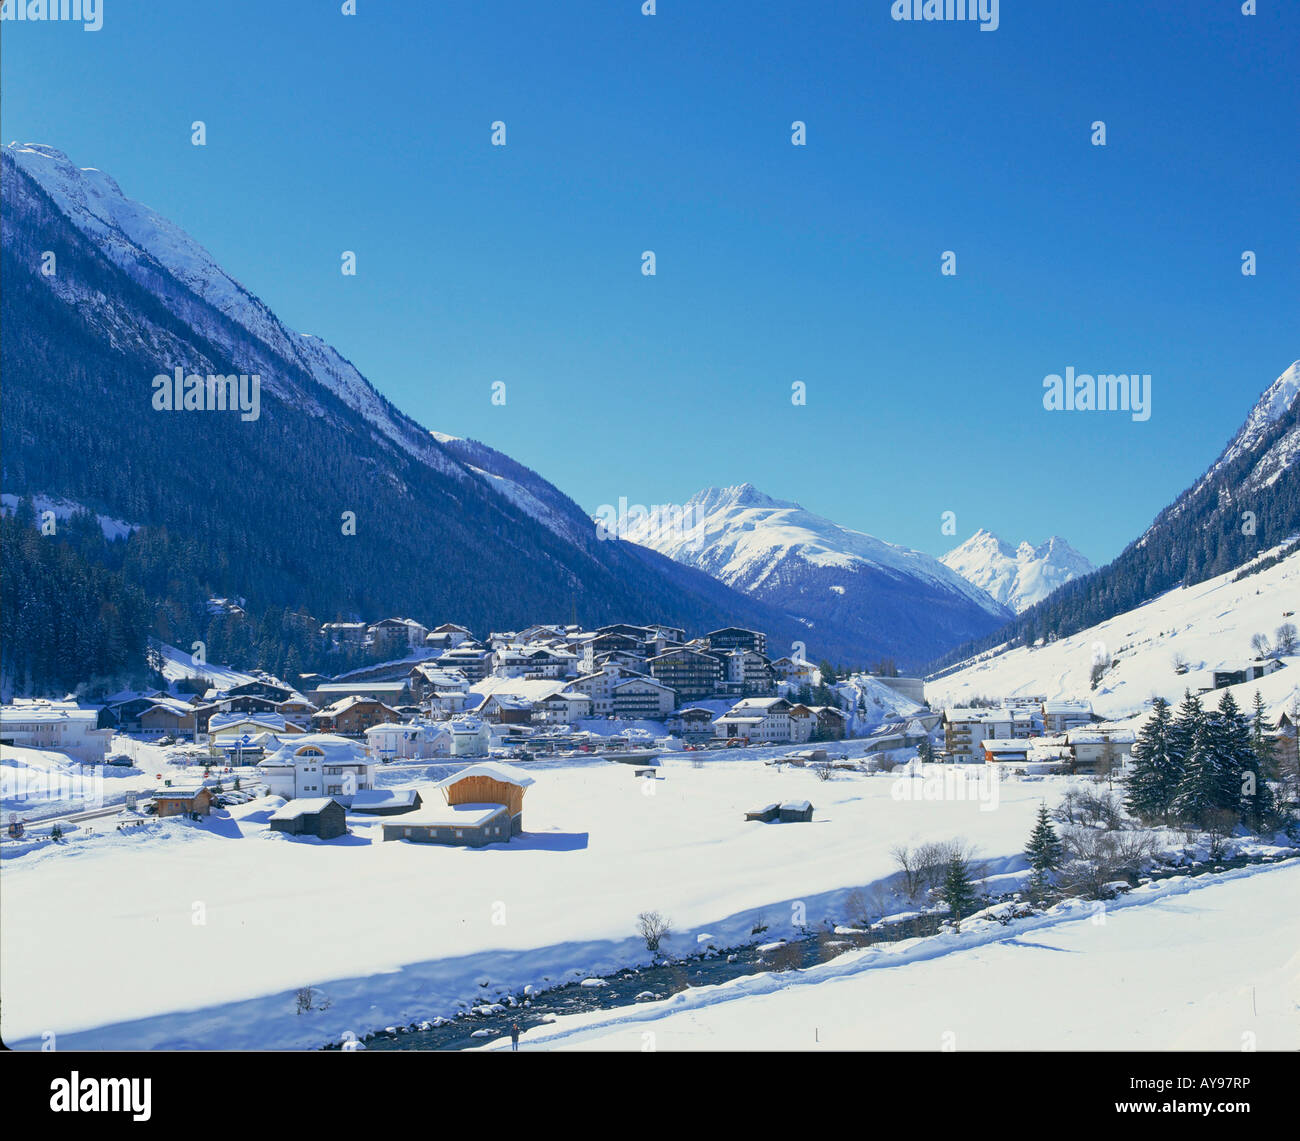 Town Of Ischgl High Resolution Stock Photography and Images - Alamy